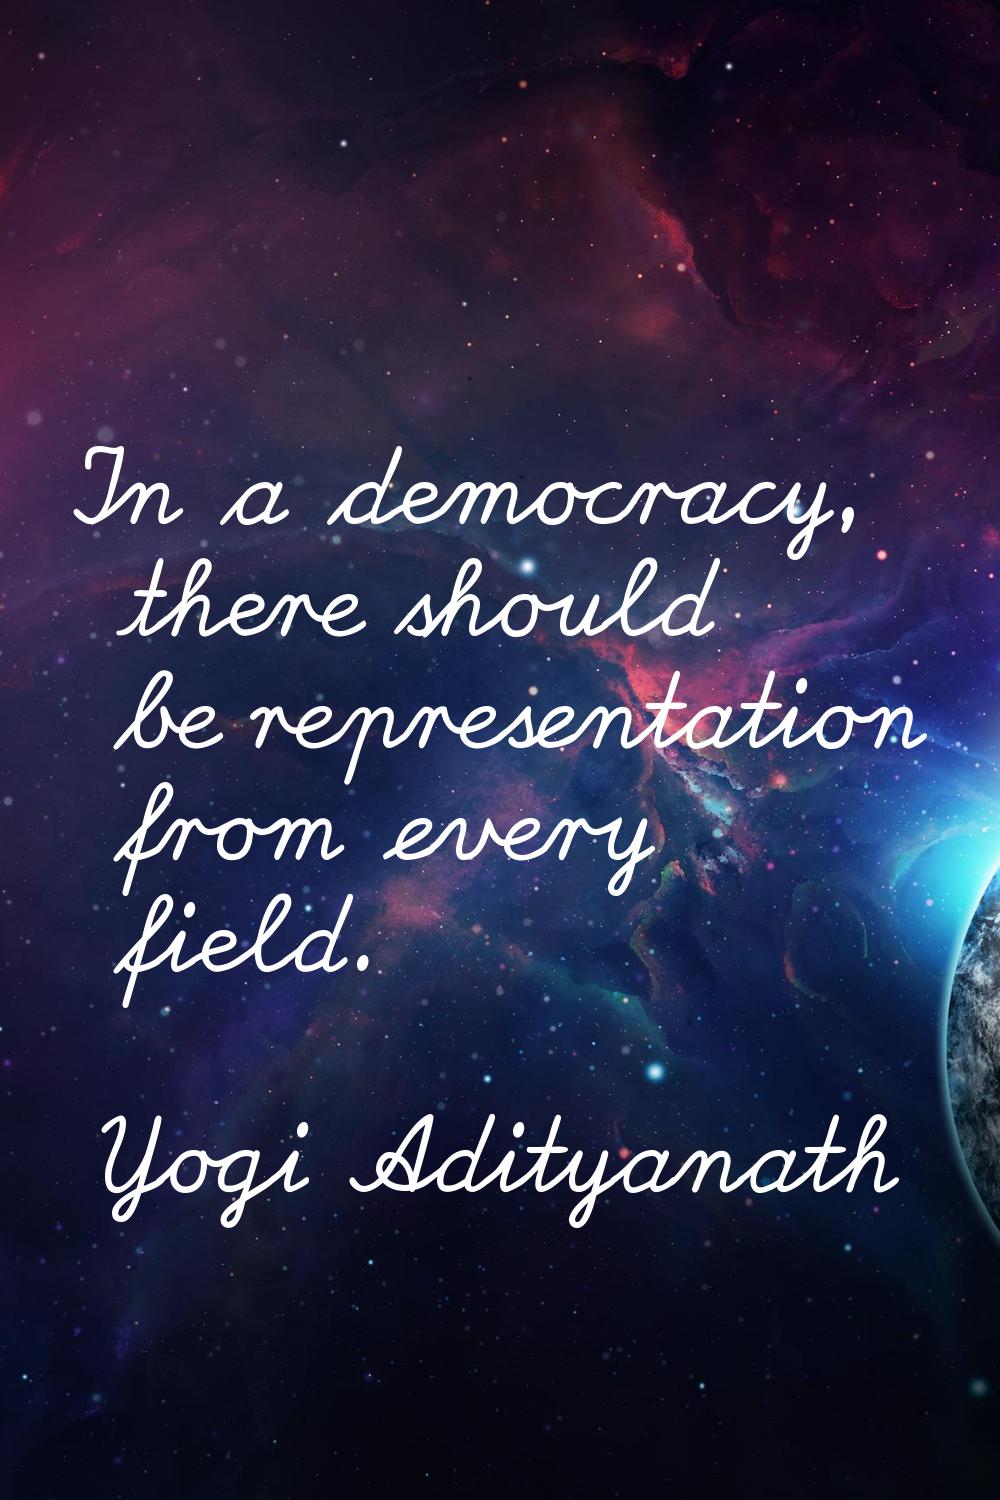 In a democracy, there should be representation from every field.